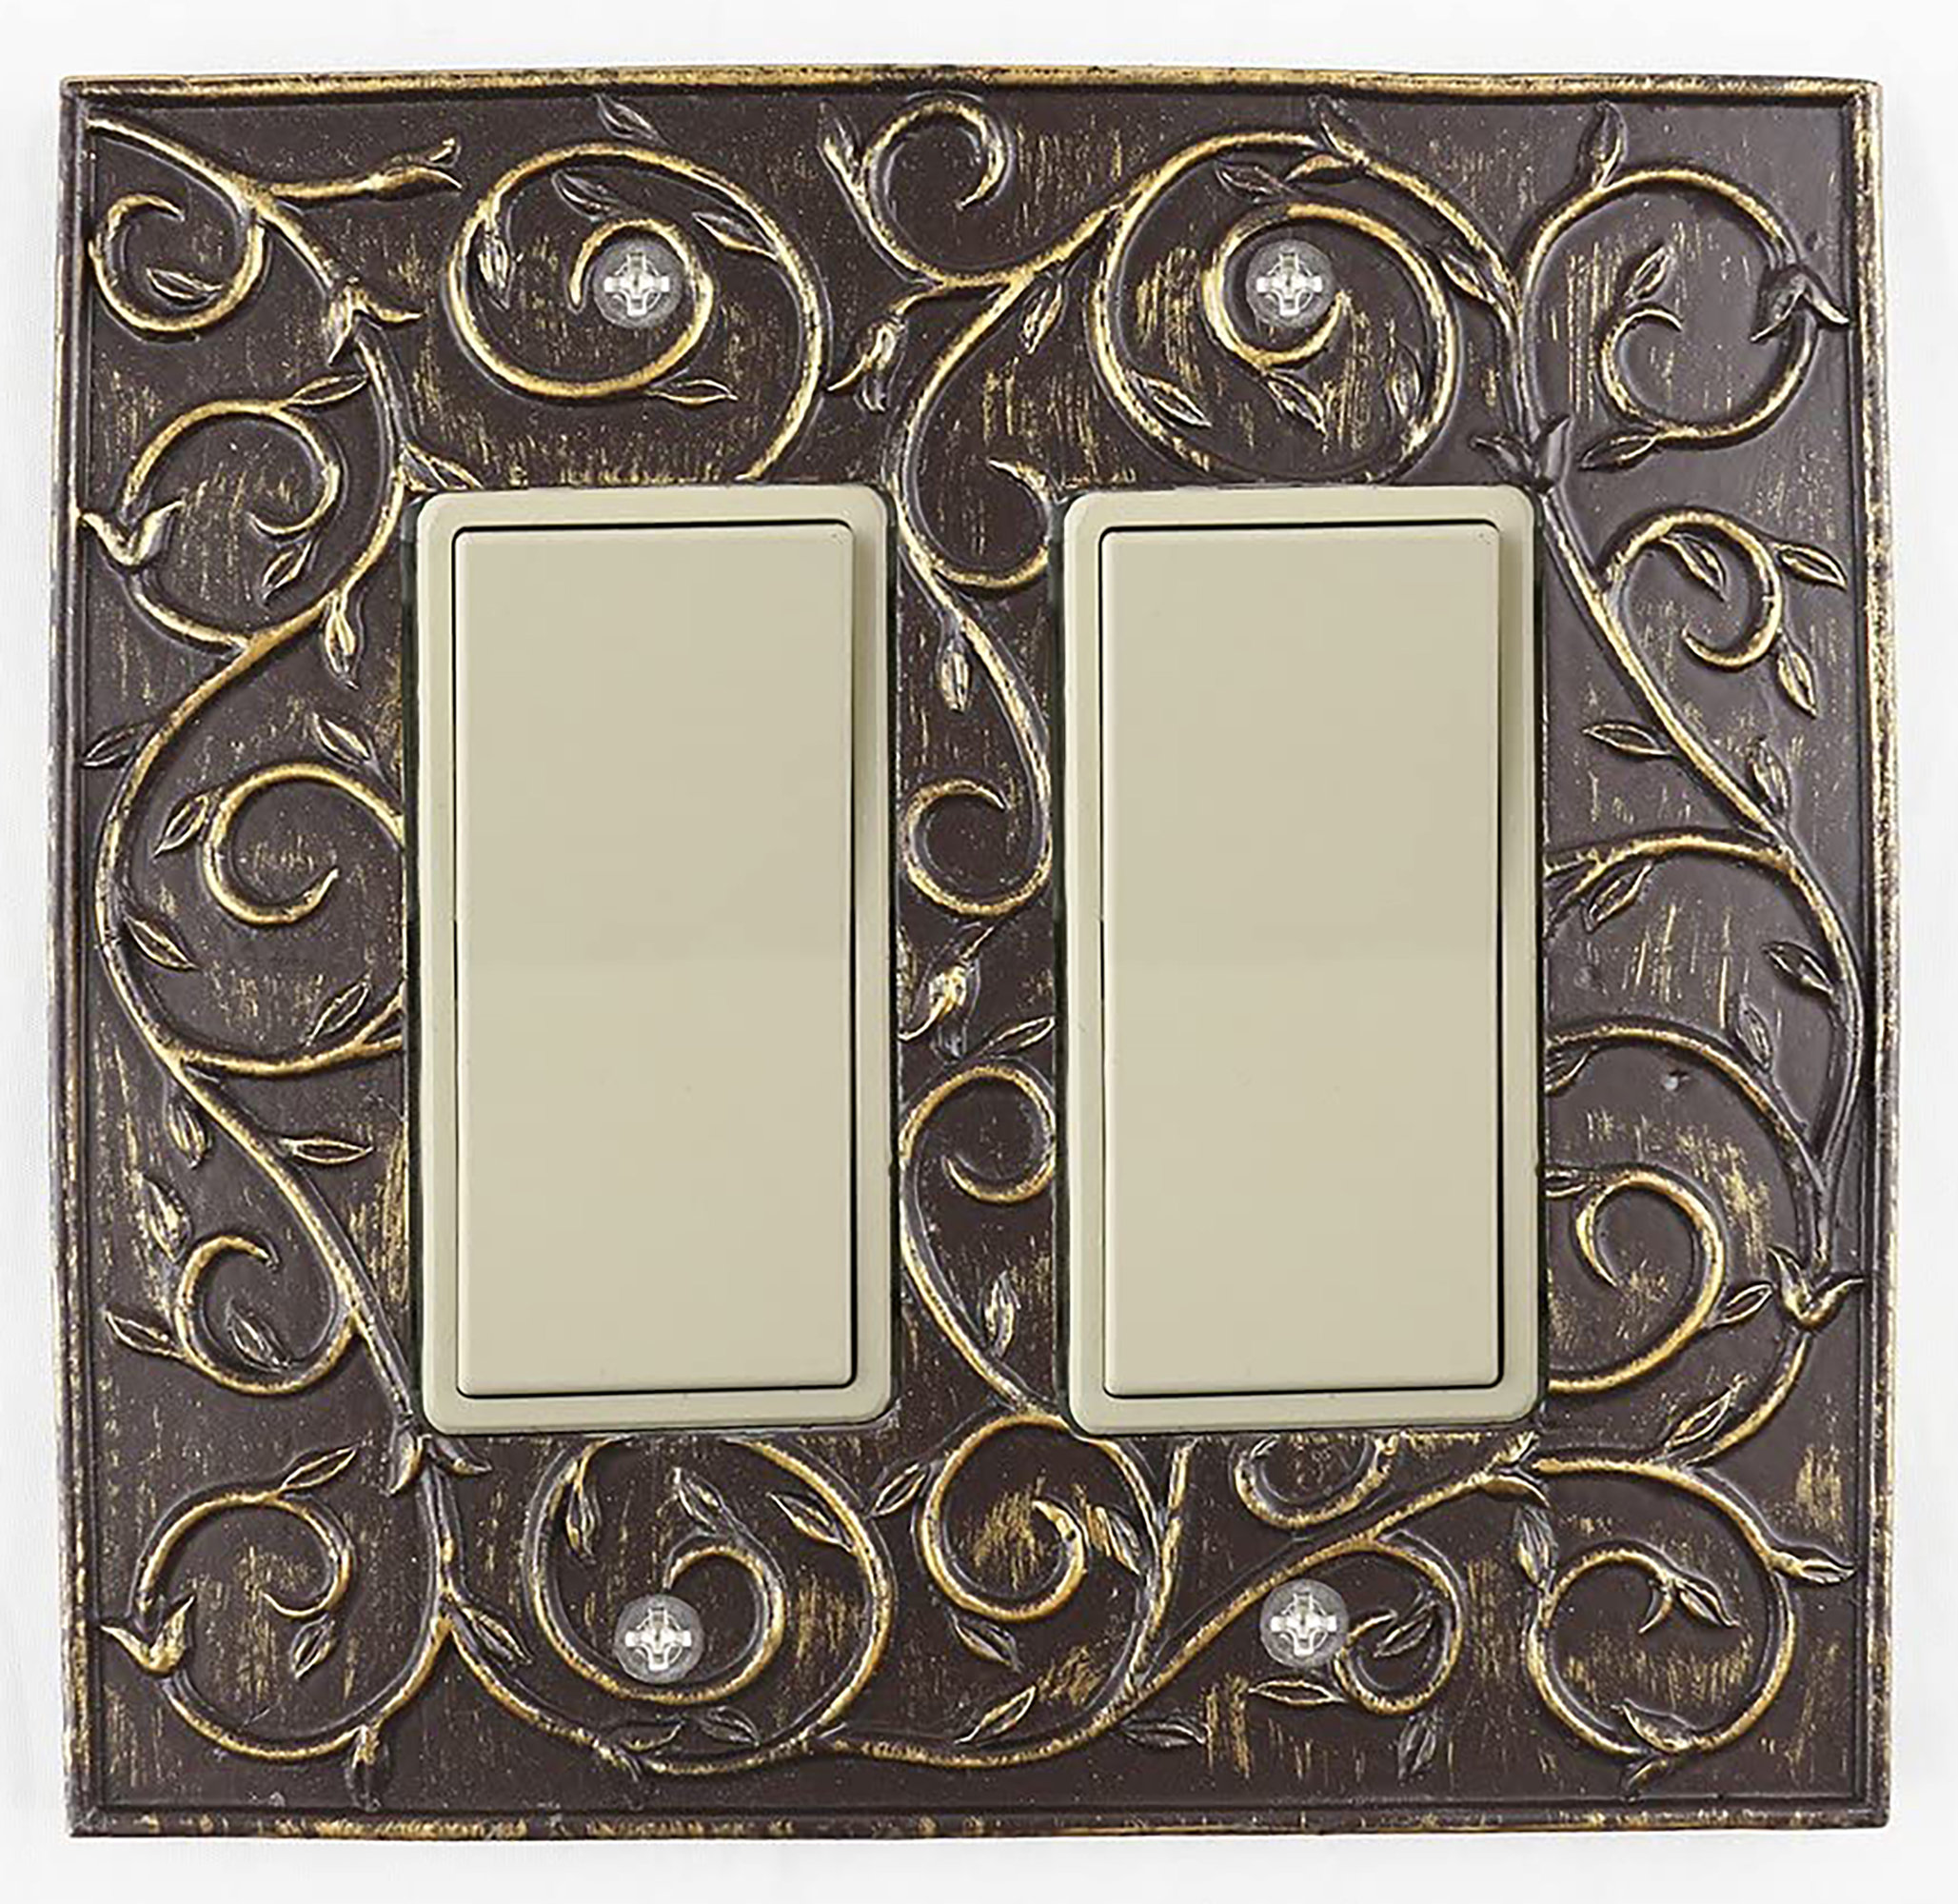 Meriville French Scroll 2-Gang Toggle Light Switch Wall Plate | Wayfair